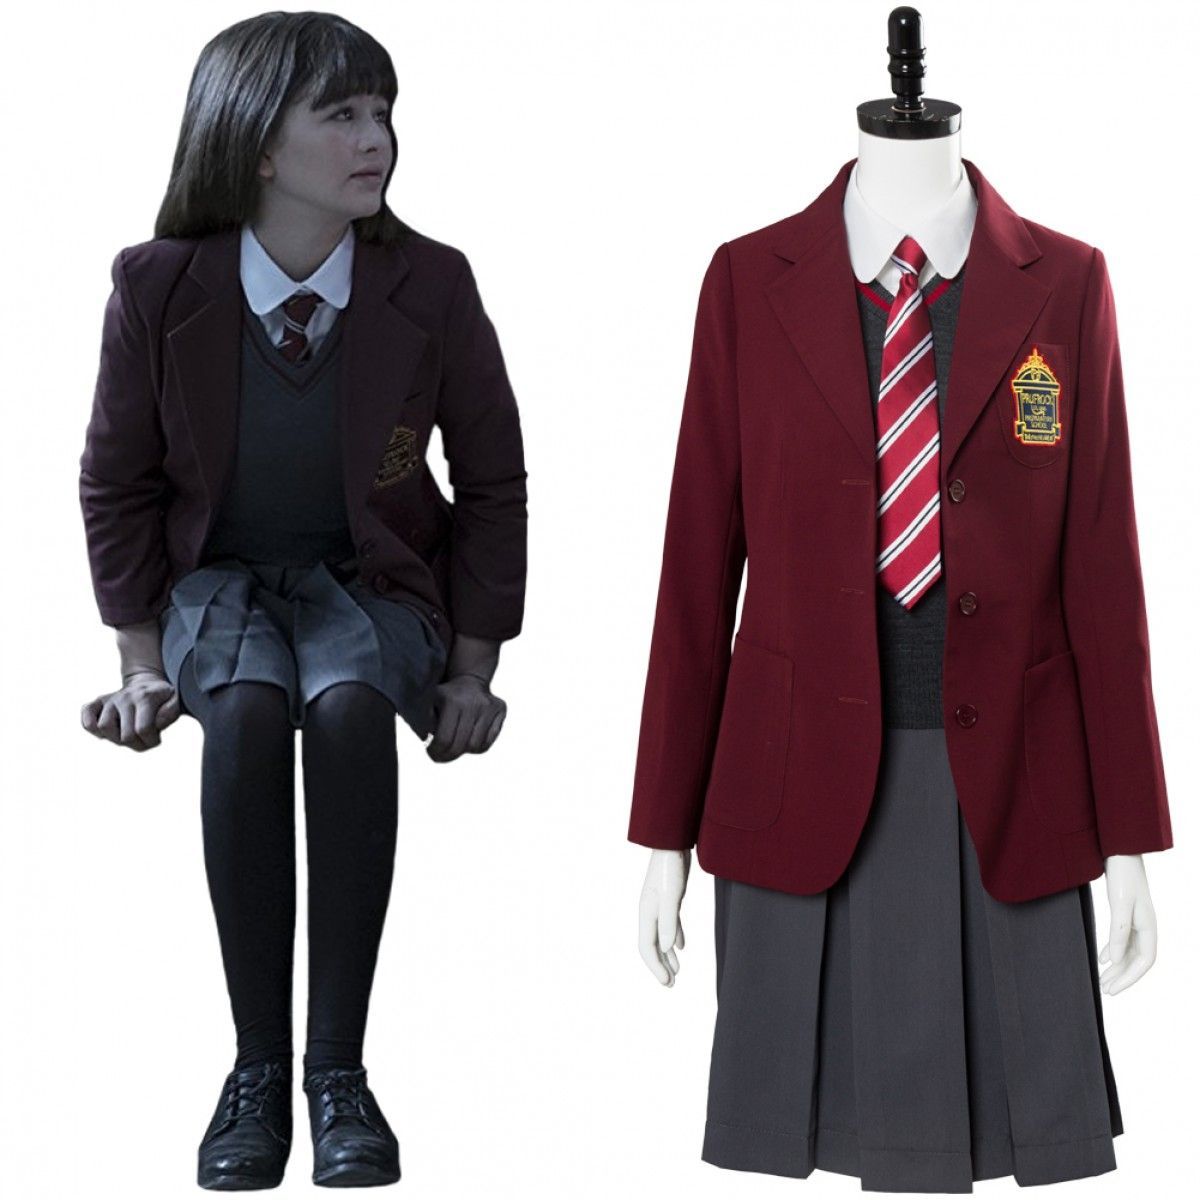 Violet Baudelaire School Uniform Dress Cosplay Costume for Lemony Snicket's A Series of Unfortunate Events. School uniform dress, Cosplay costumes, Costumes